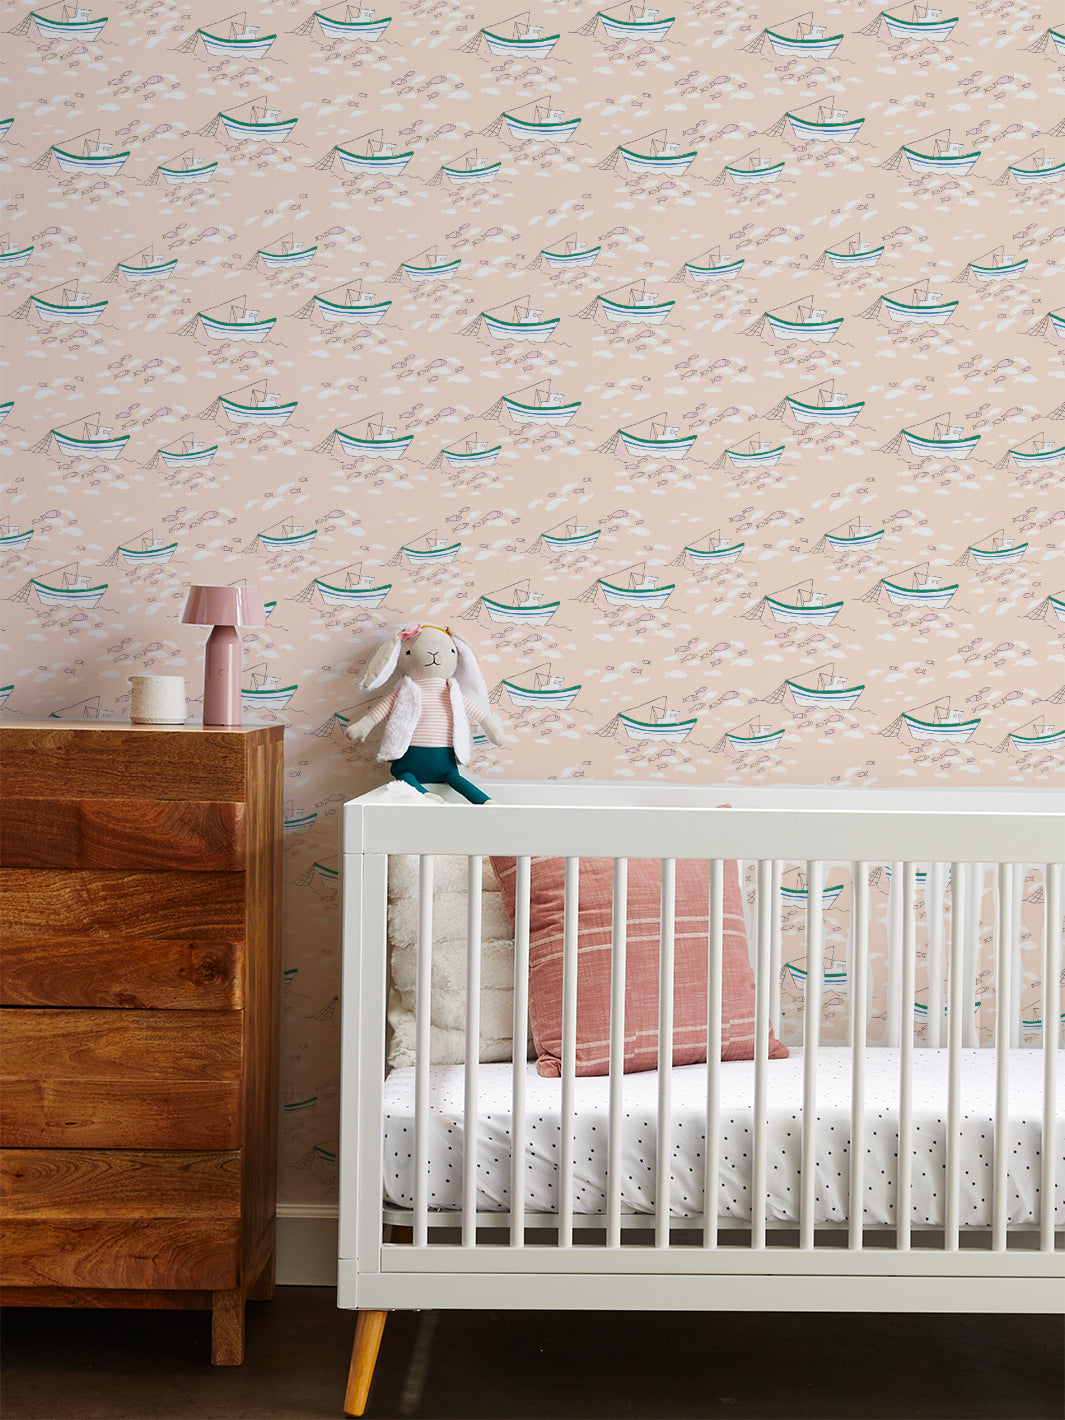 'Fishing Boats' Wallpaper by Tea Collection - Peach